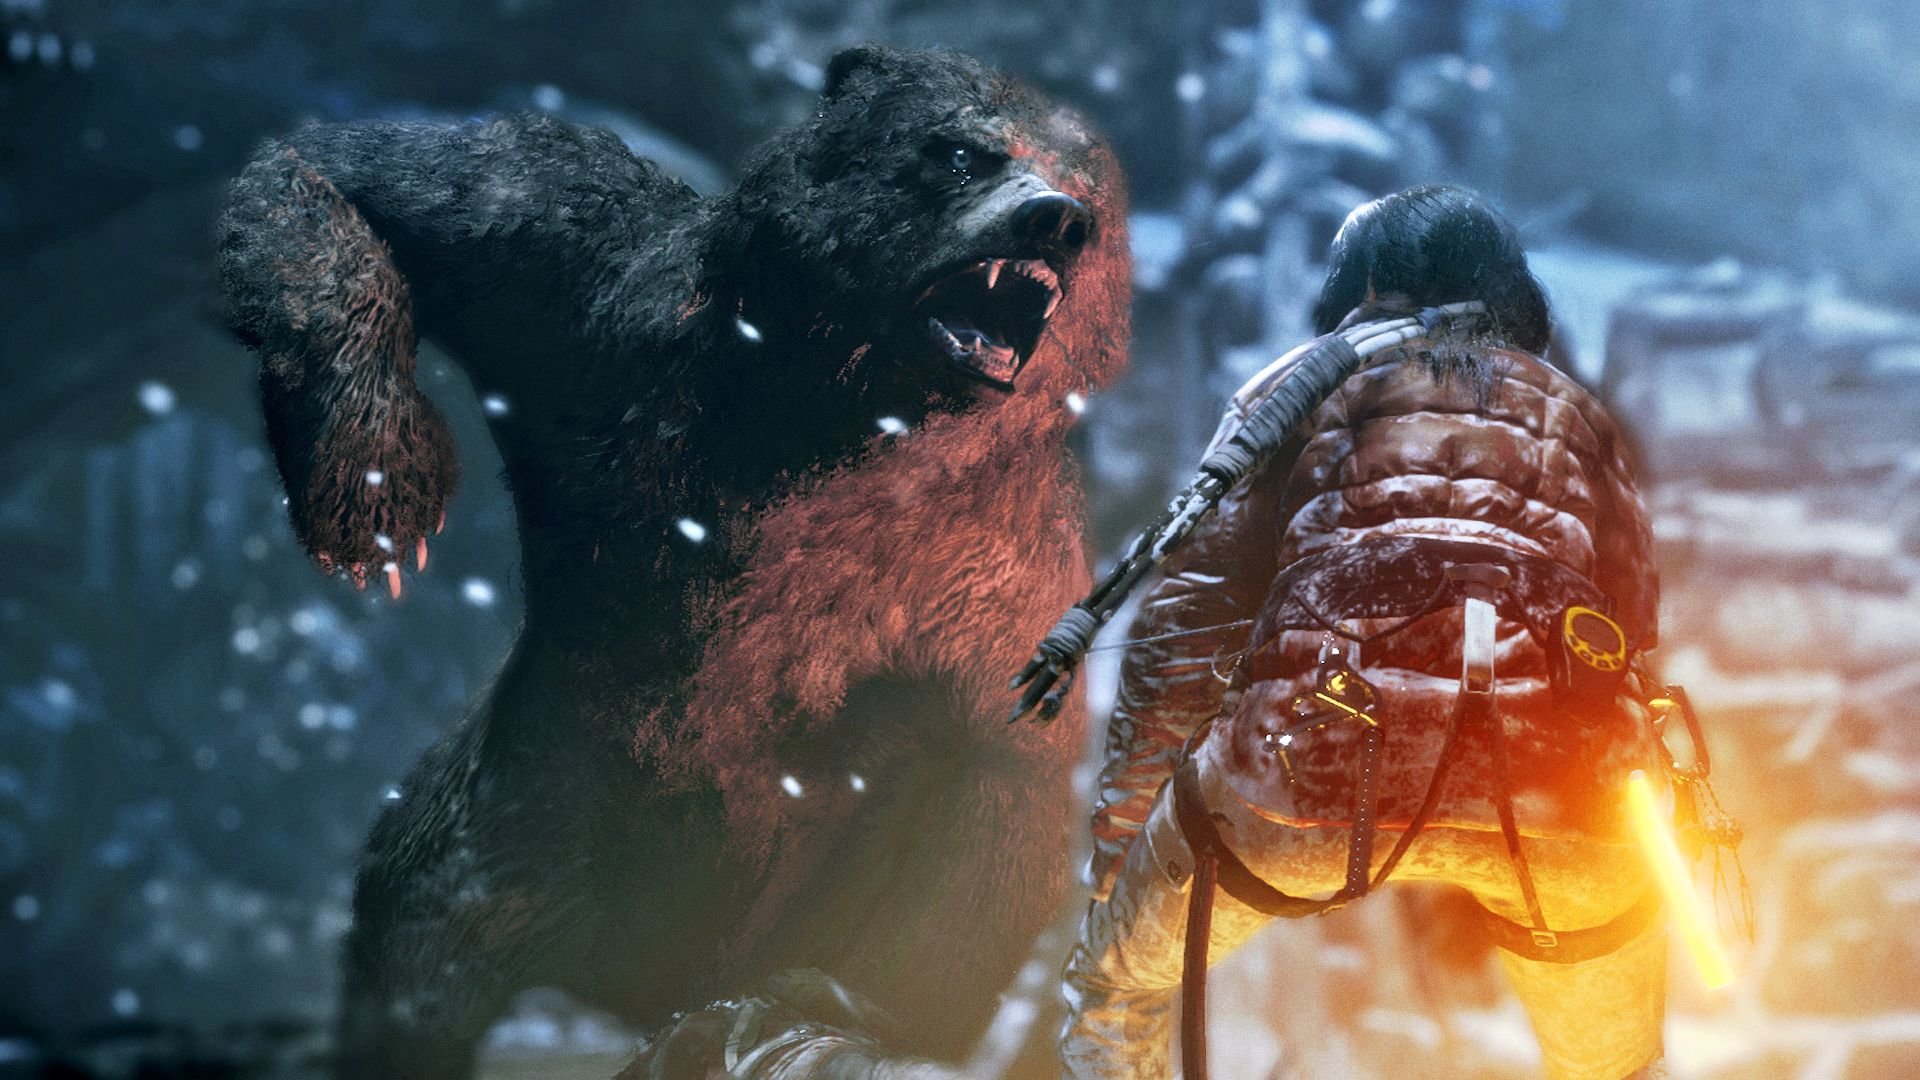 Download hd 1920x1080 Rise Of The Tomb Raider desktop background ID:83908 for free